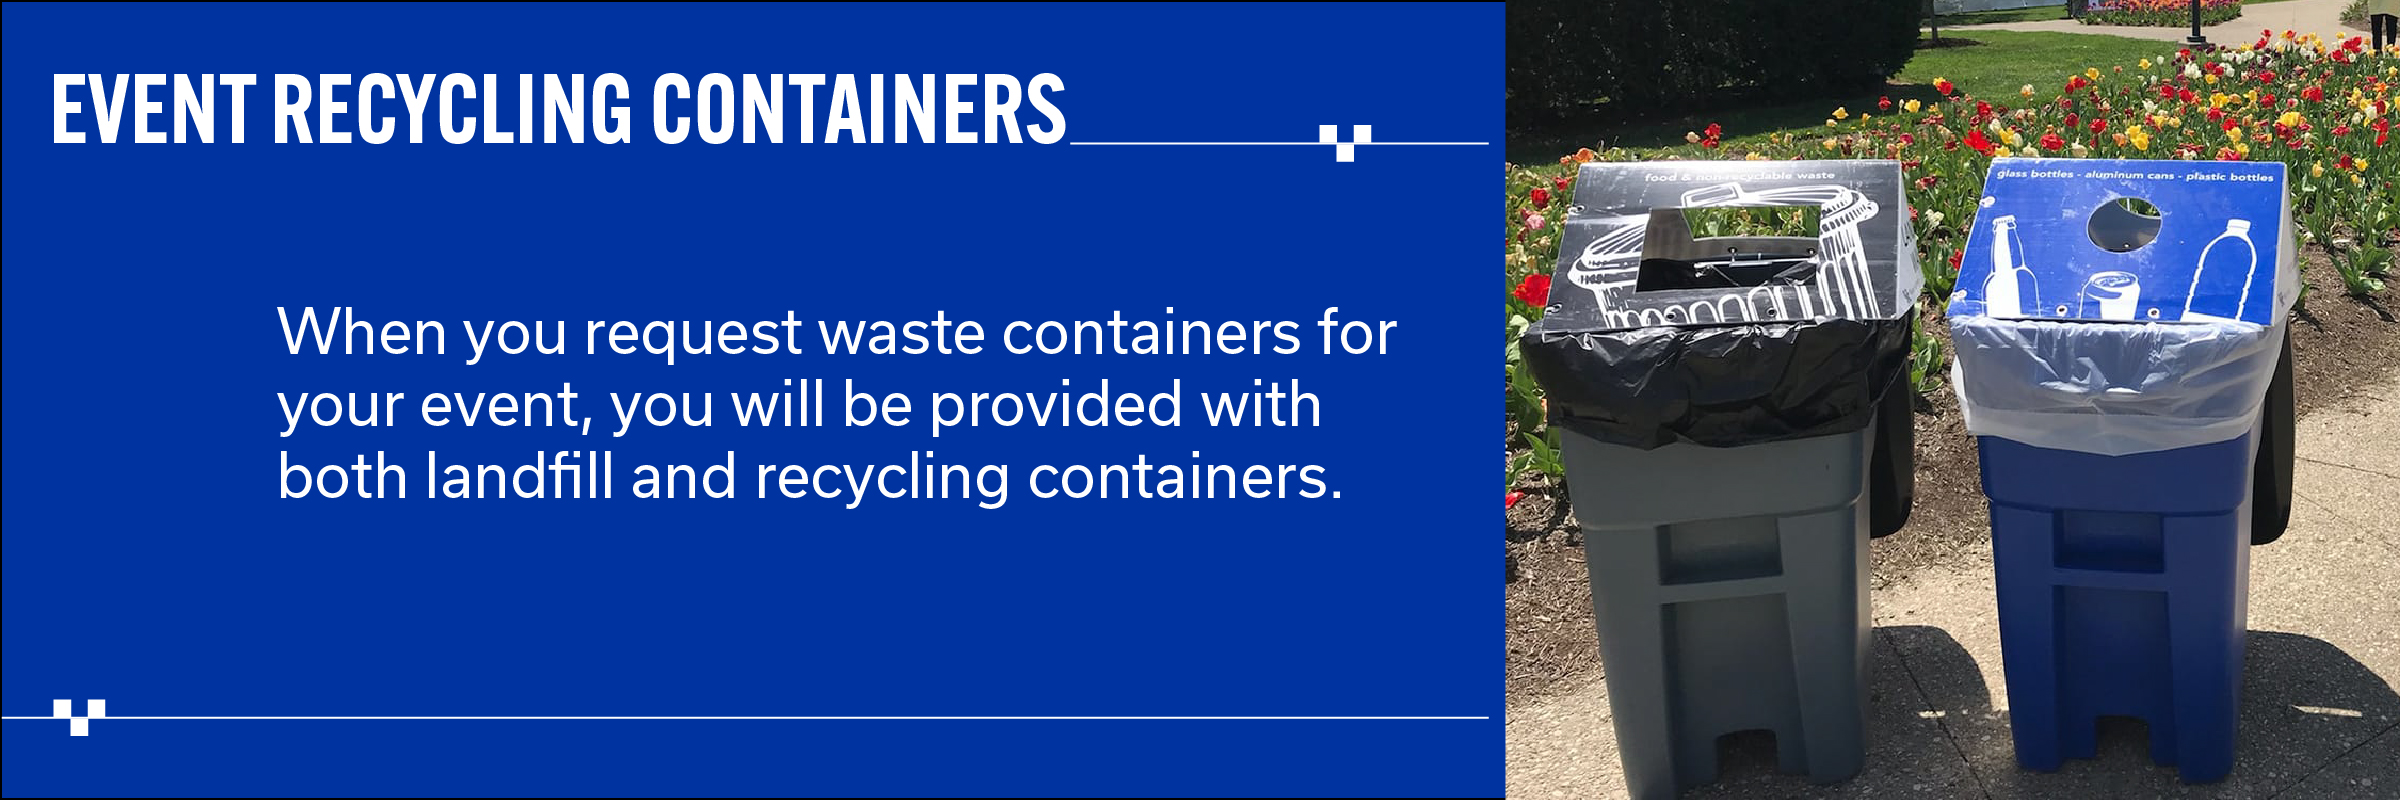 reads, "event recycling containers. When you request waste containers for your event, you will be provided with both landfill and recycling containers." On the right is a picture of UK Recycling Event Containers.